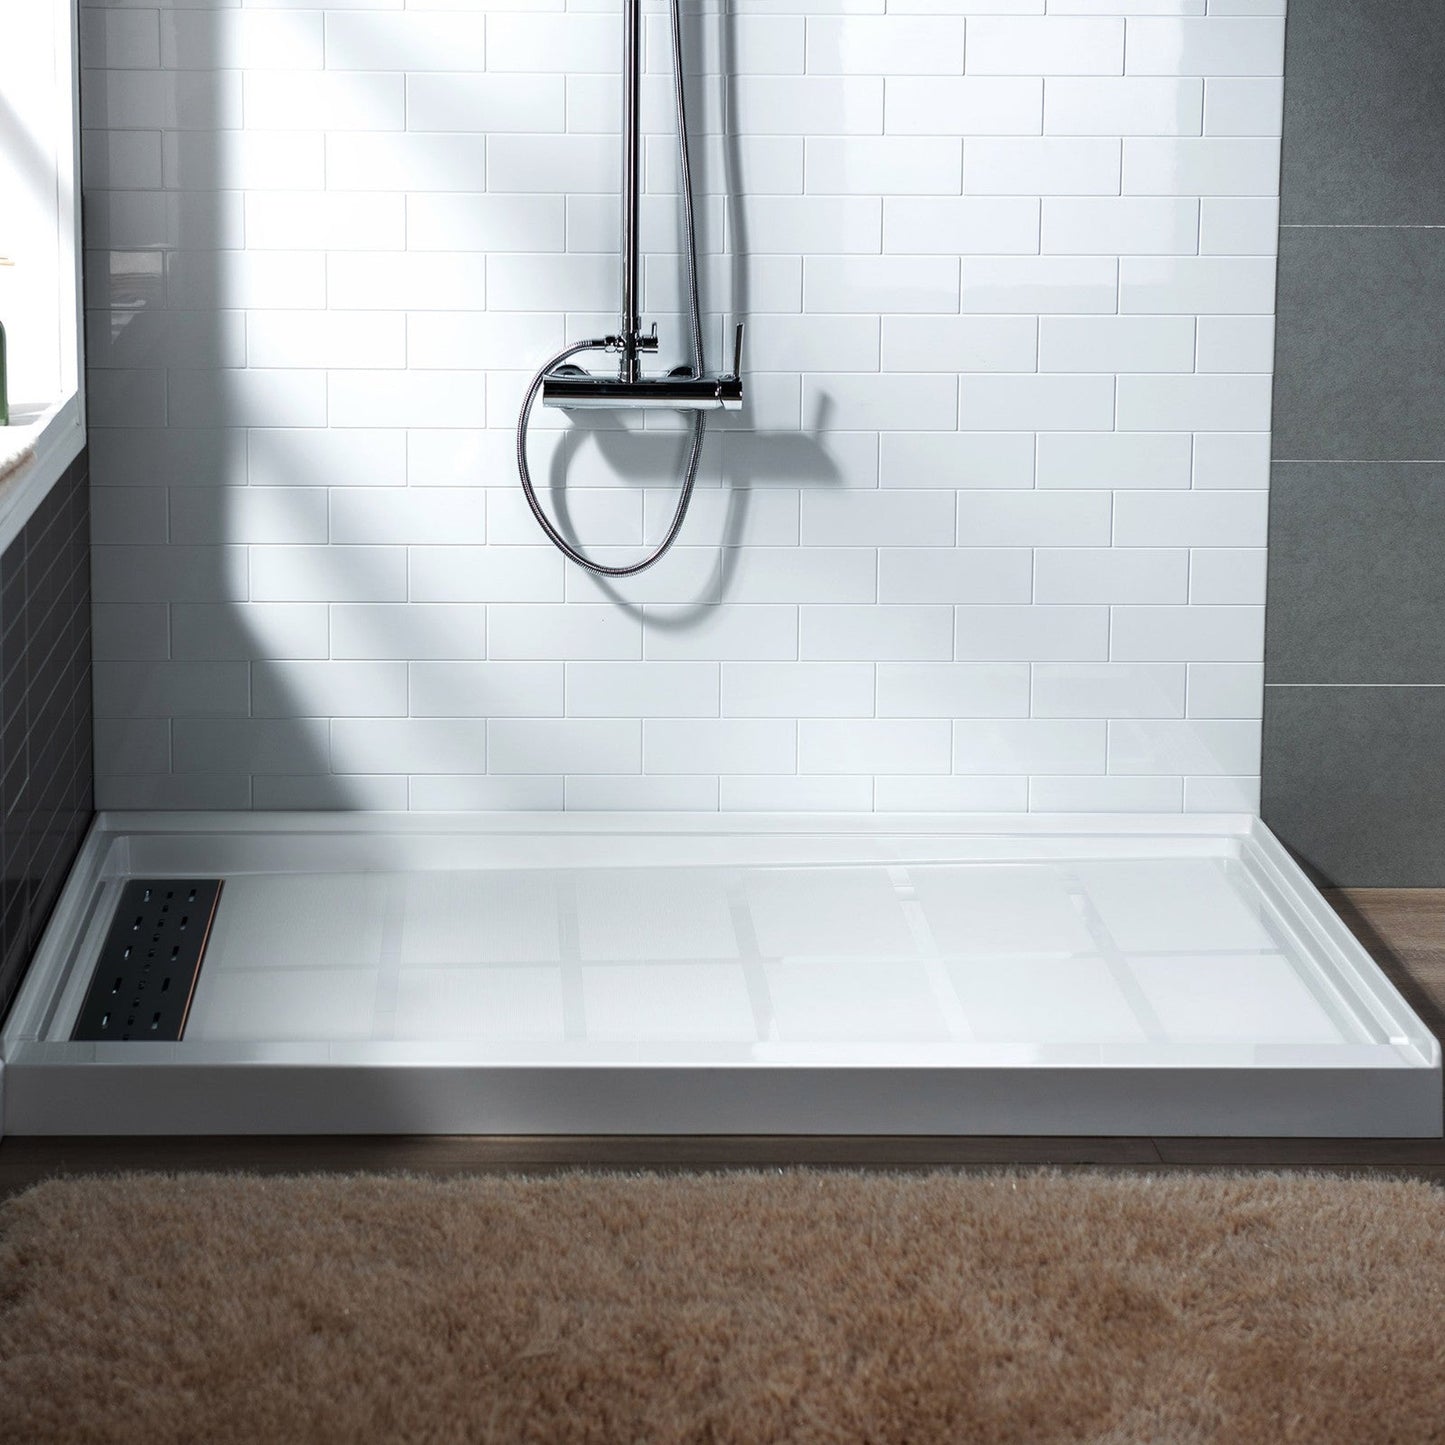 WoodBridge 60" x 30" White Solid Surface Shower Base Left Drain Location With Oil Rubbed Bronze Trench Drain Cover